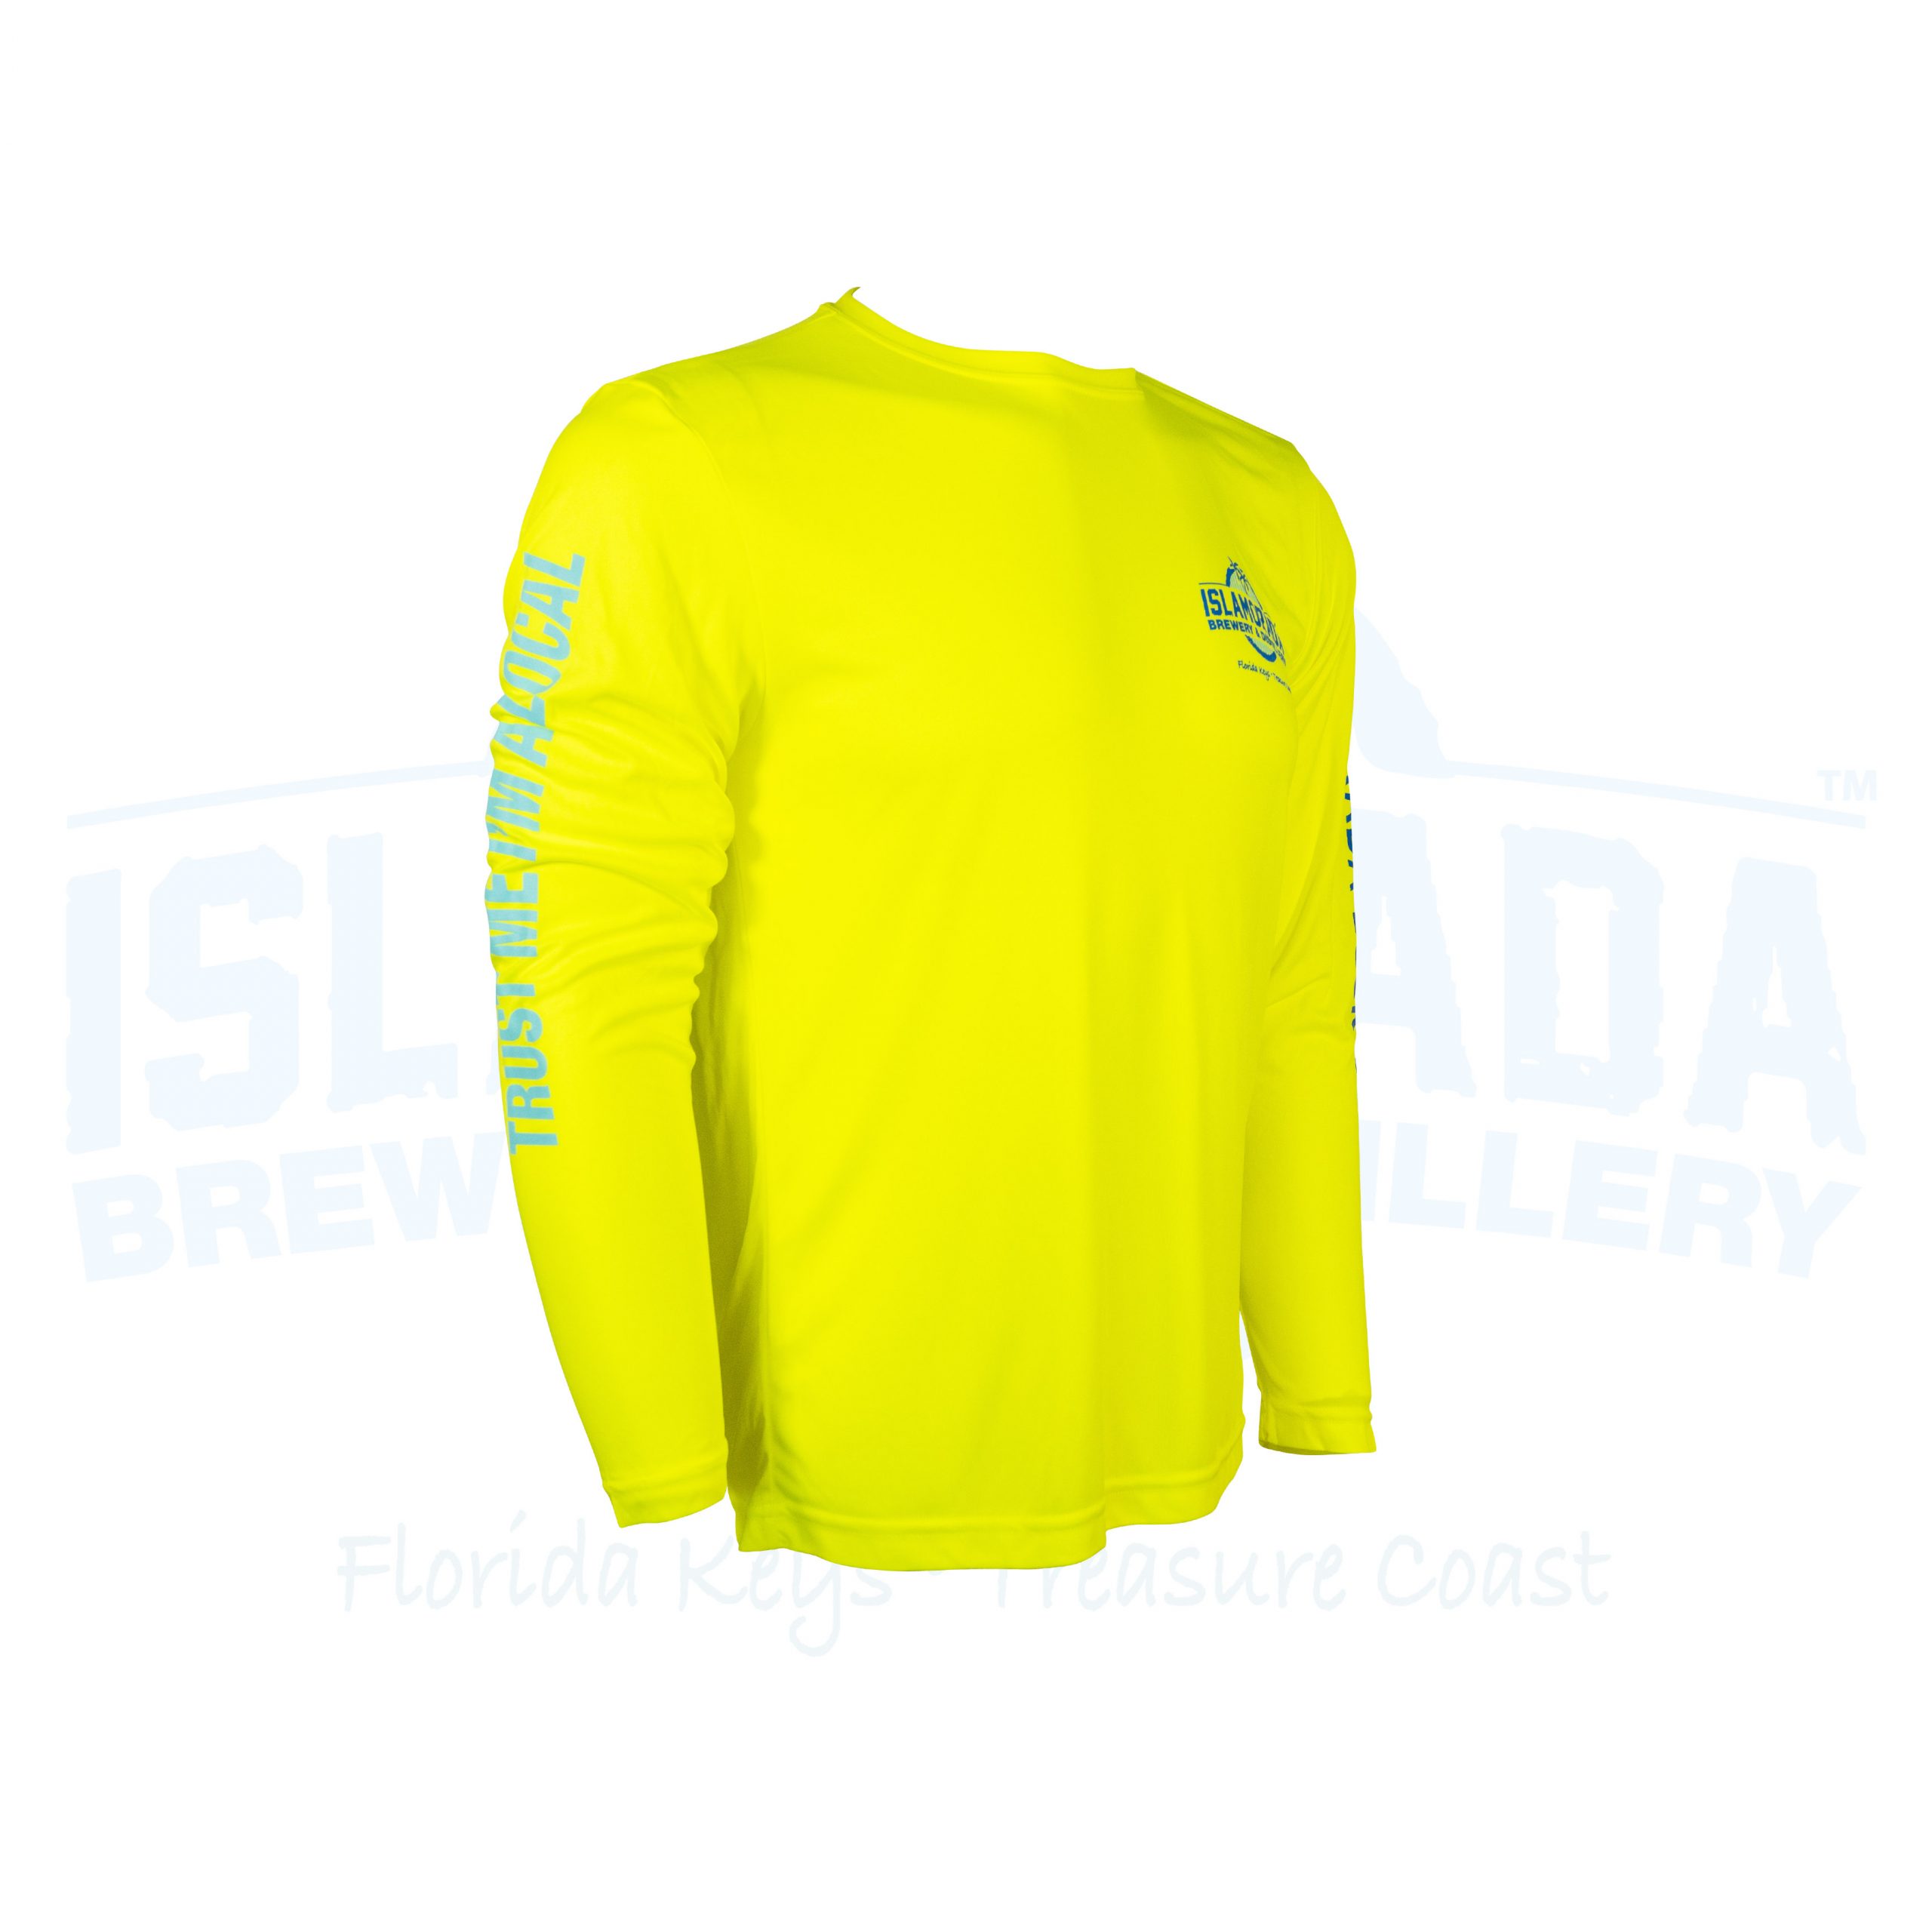 LS Dry Fit “Lighthouse” Yellow